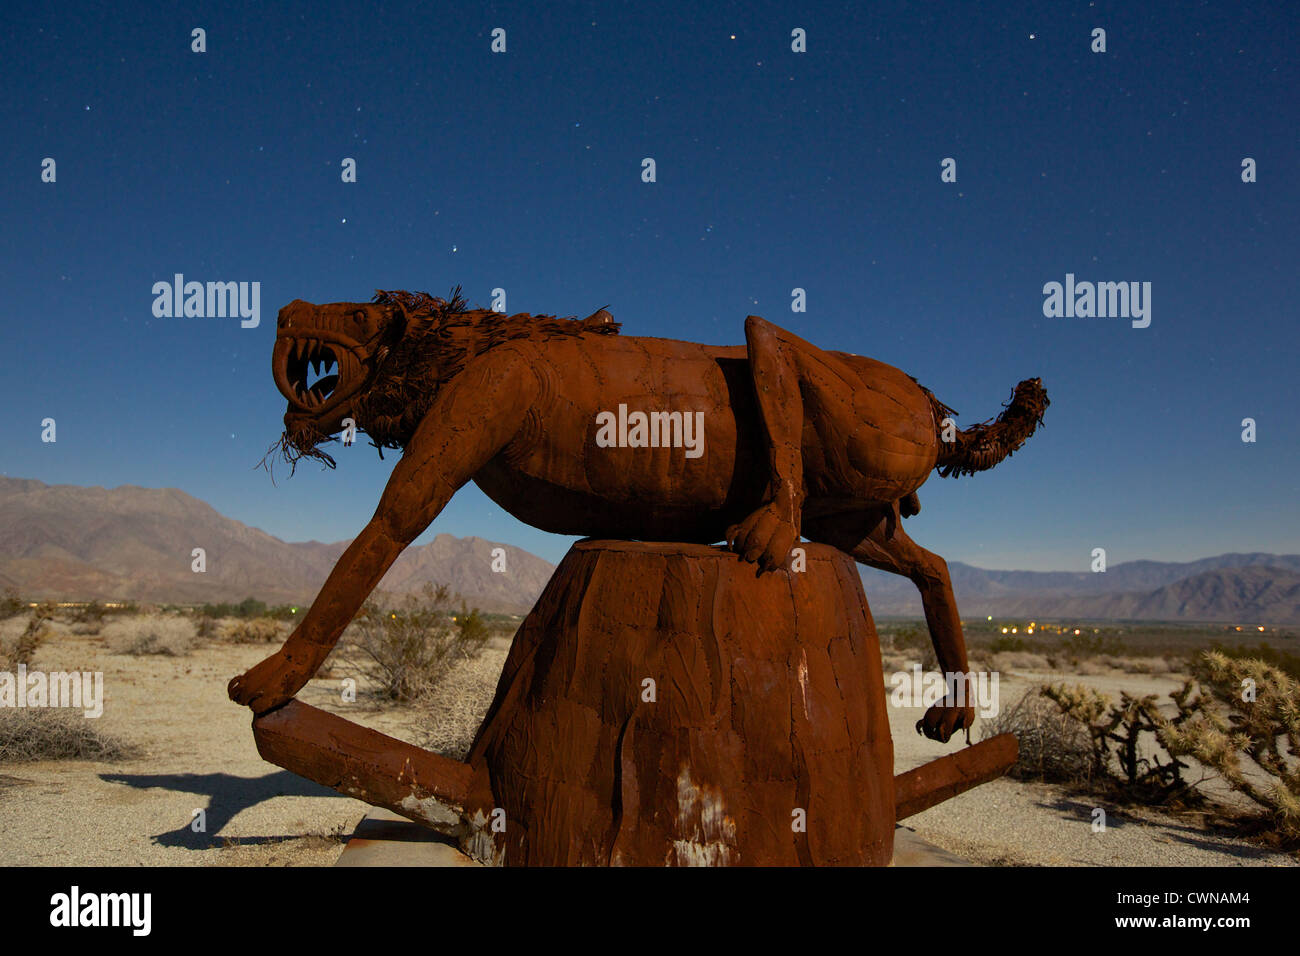 Saber tooth tiger sculpture located in Borrego Springs CA at night under the stars Stock Photo